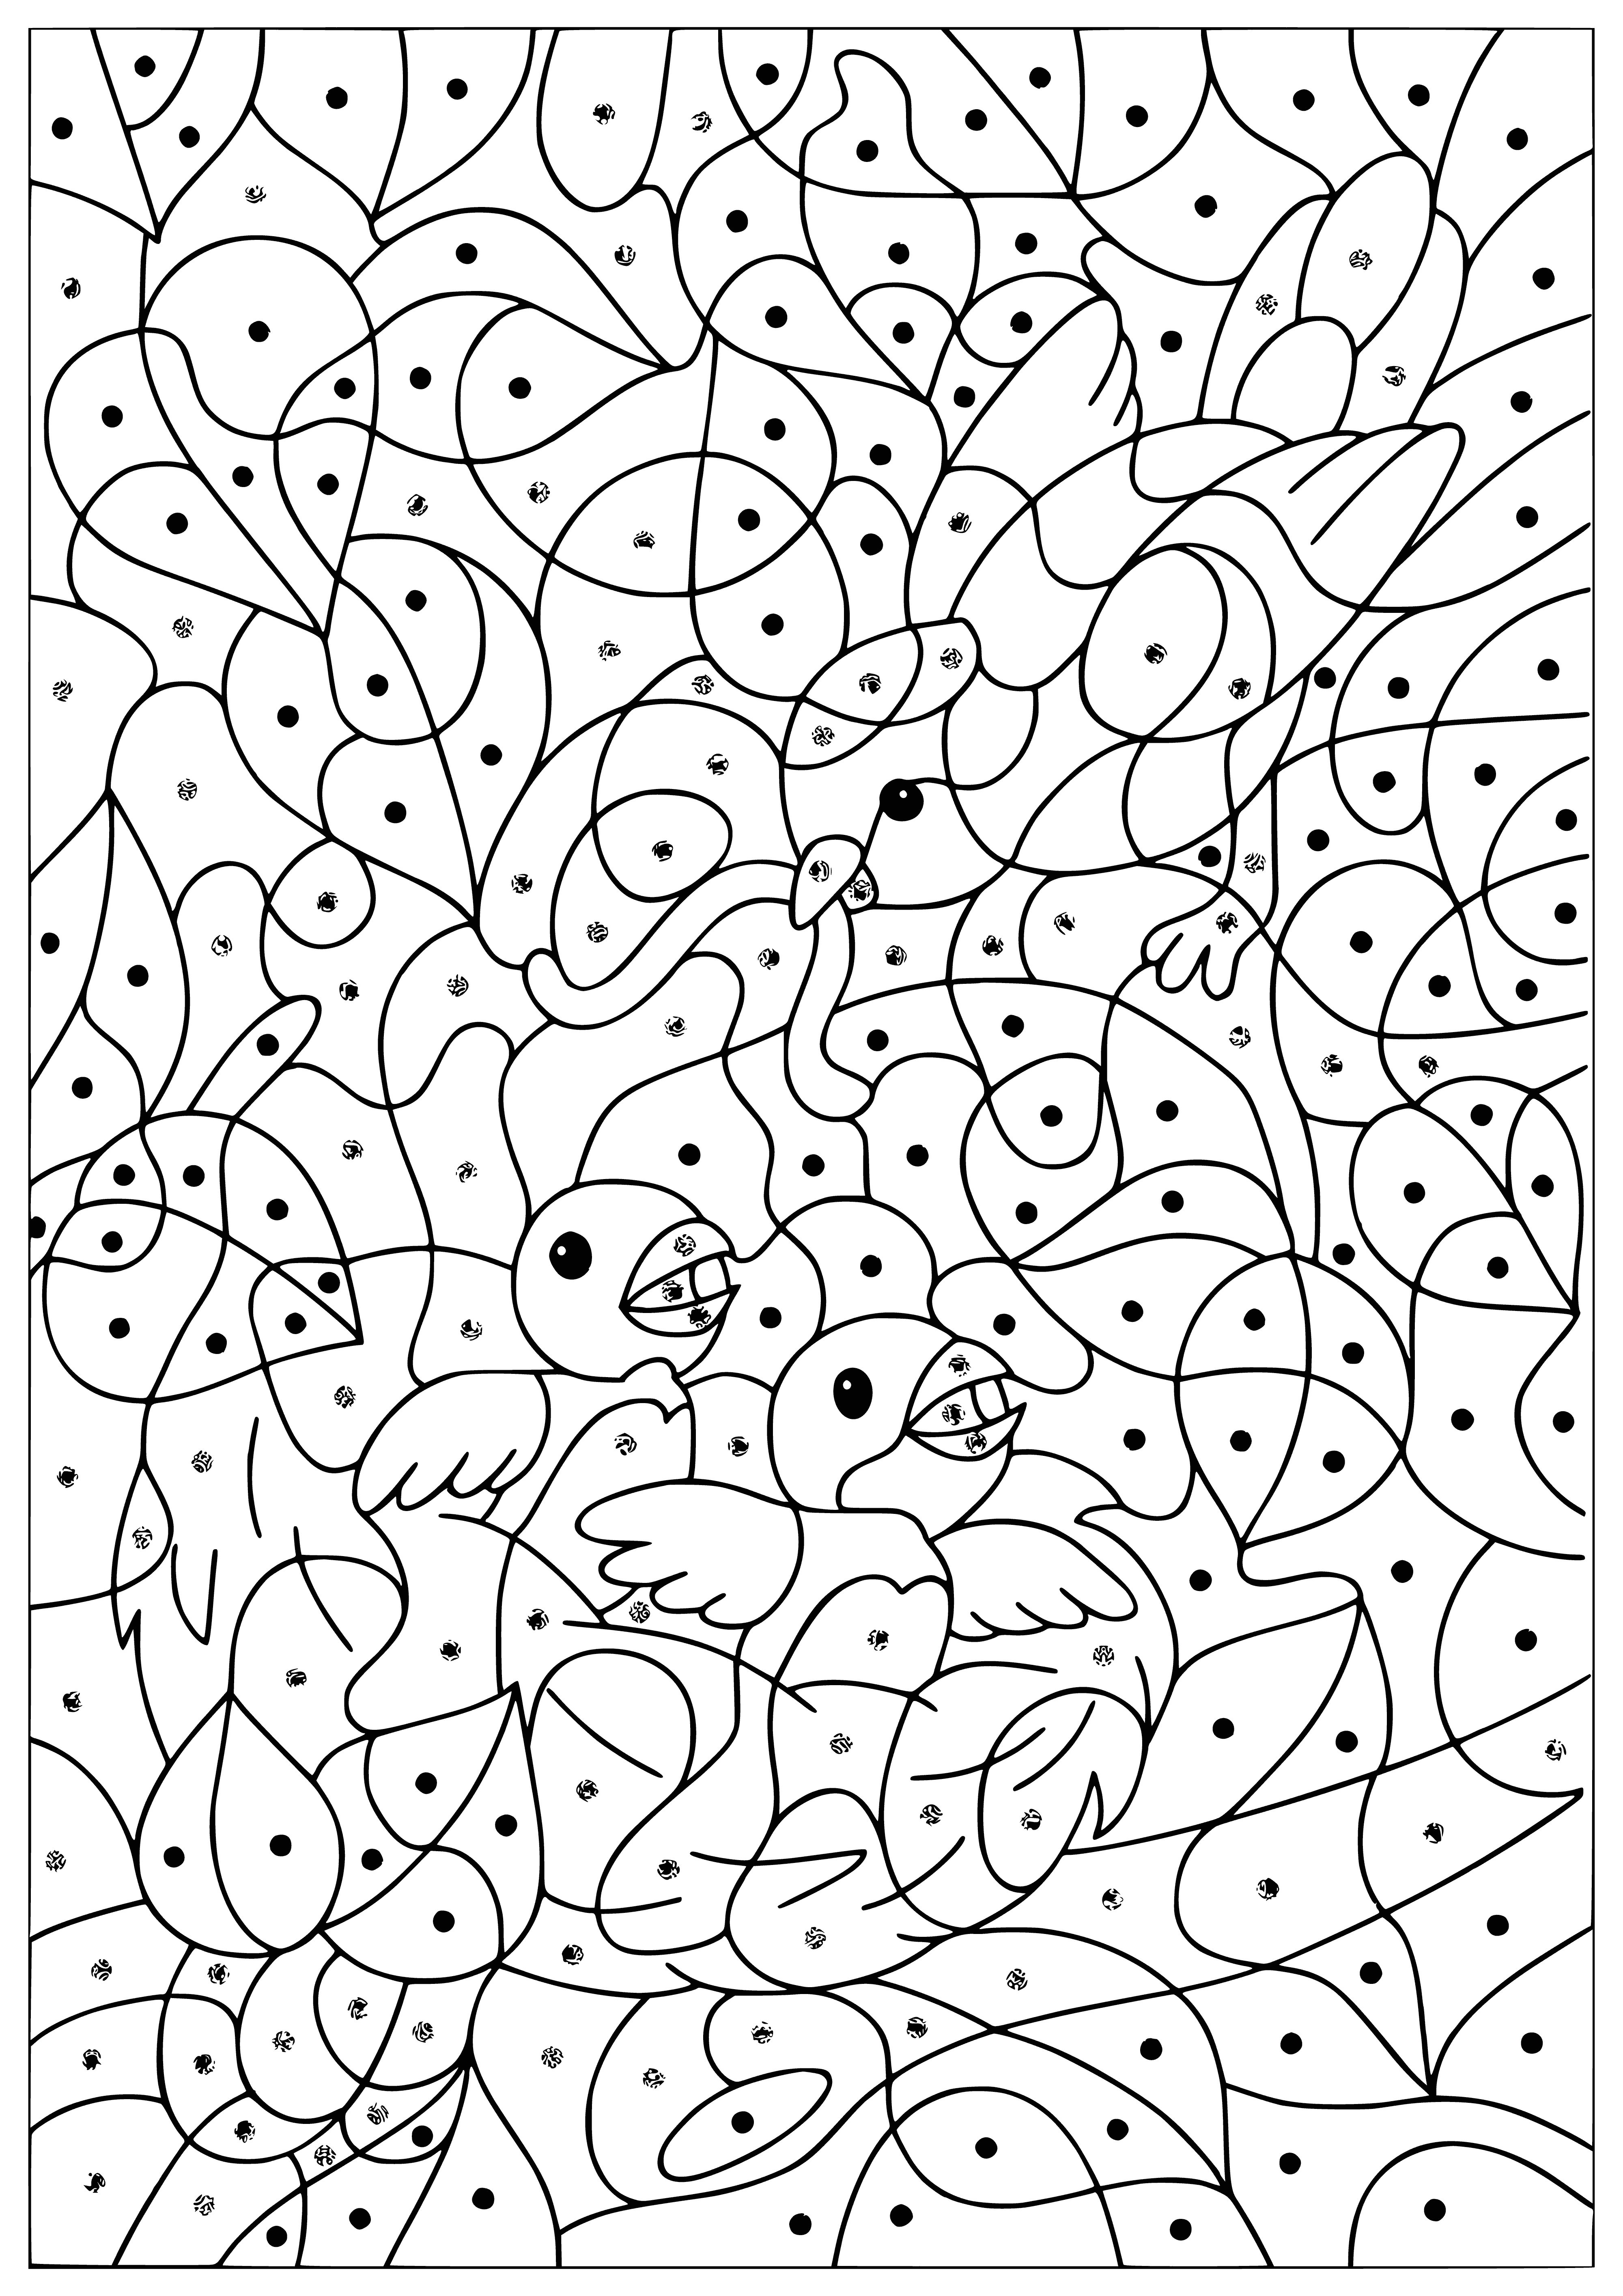 coloring page: Chicks in line: Red, Green, Blue, etc.